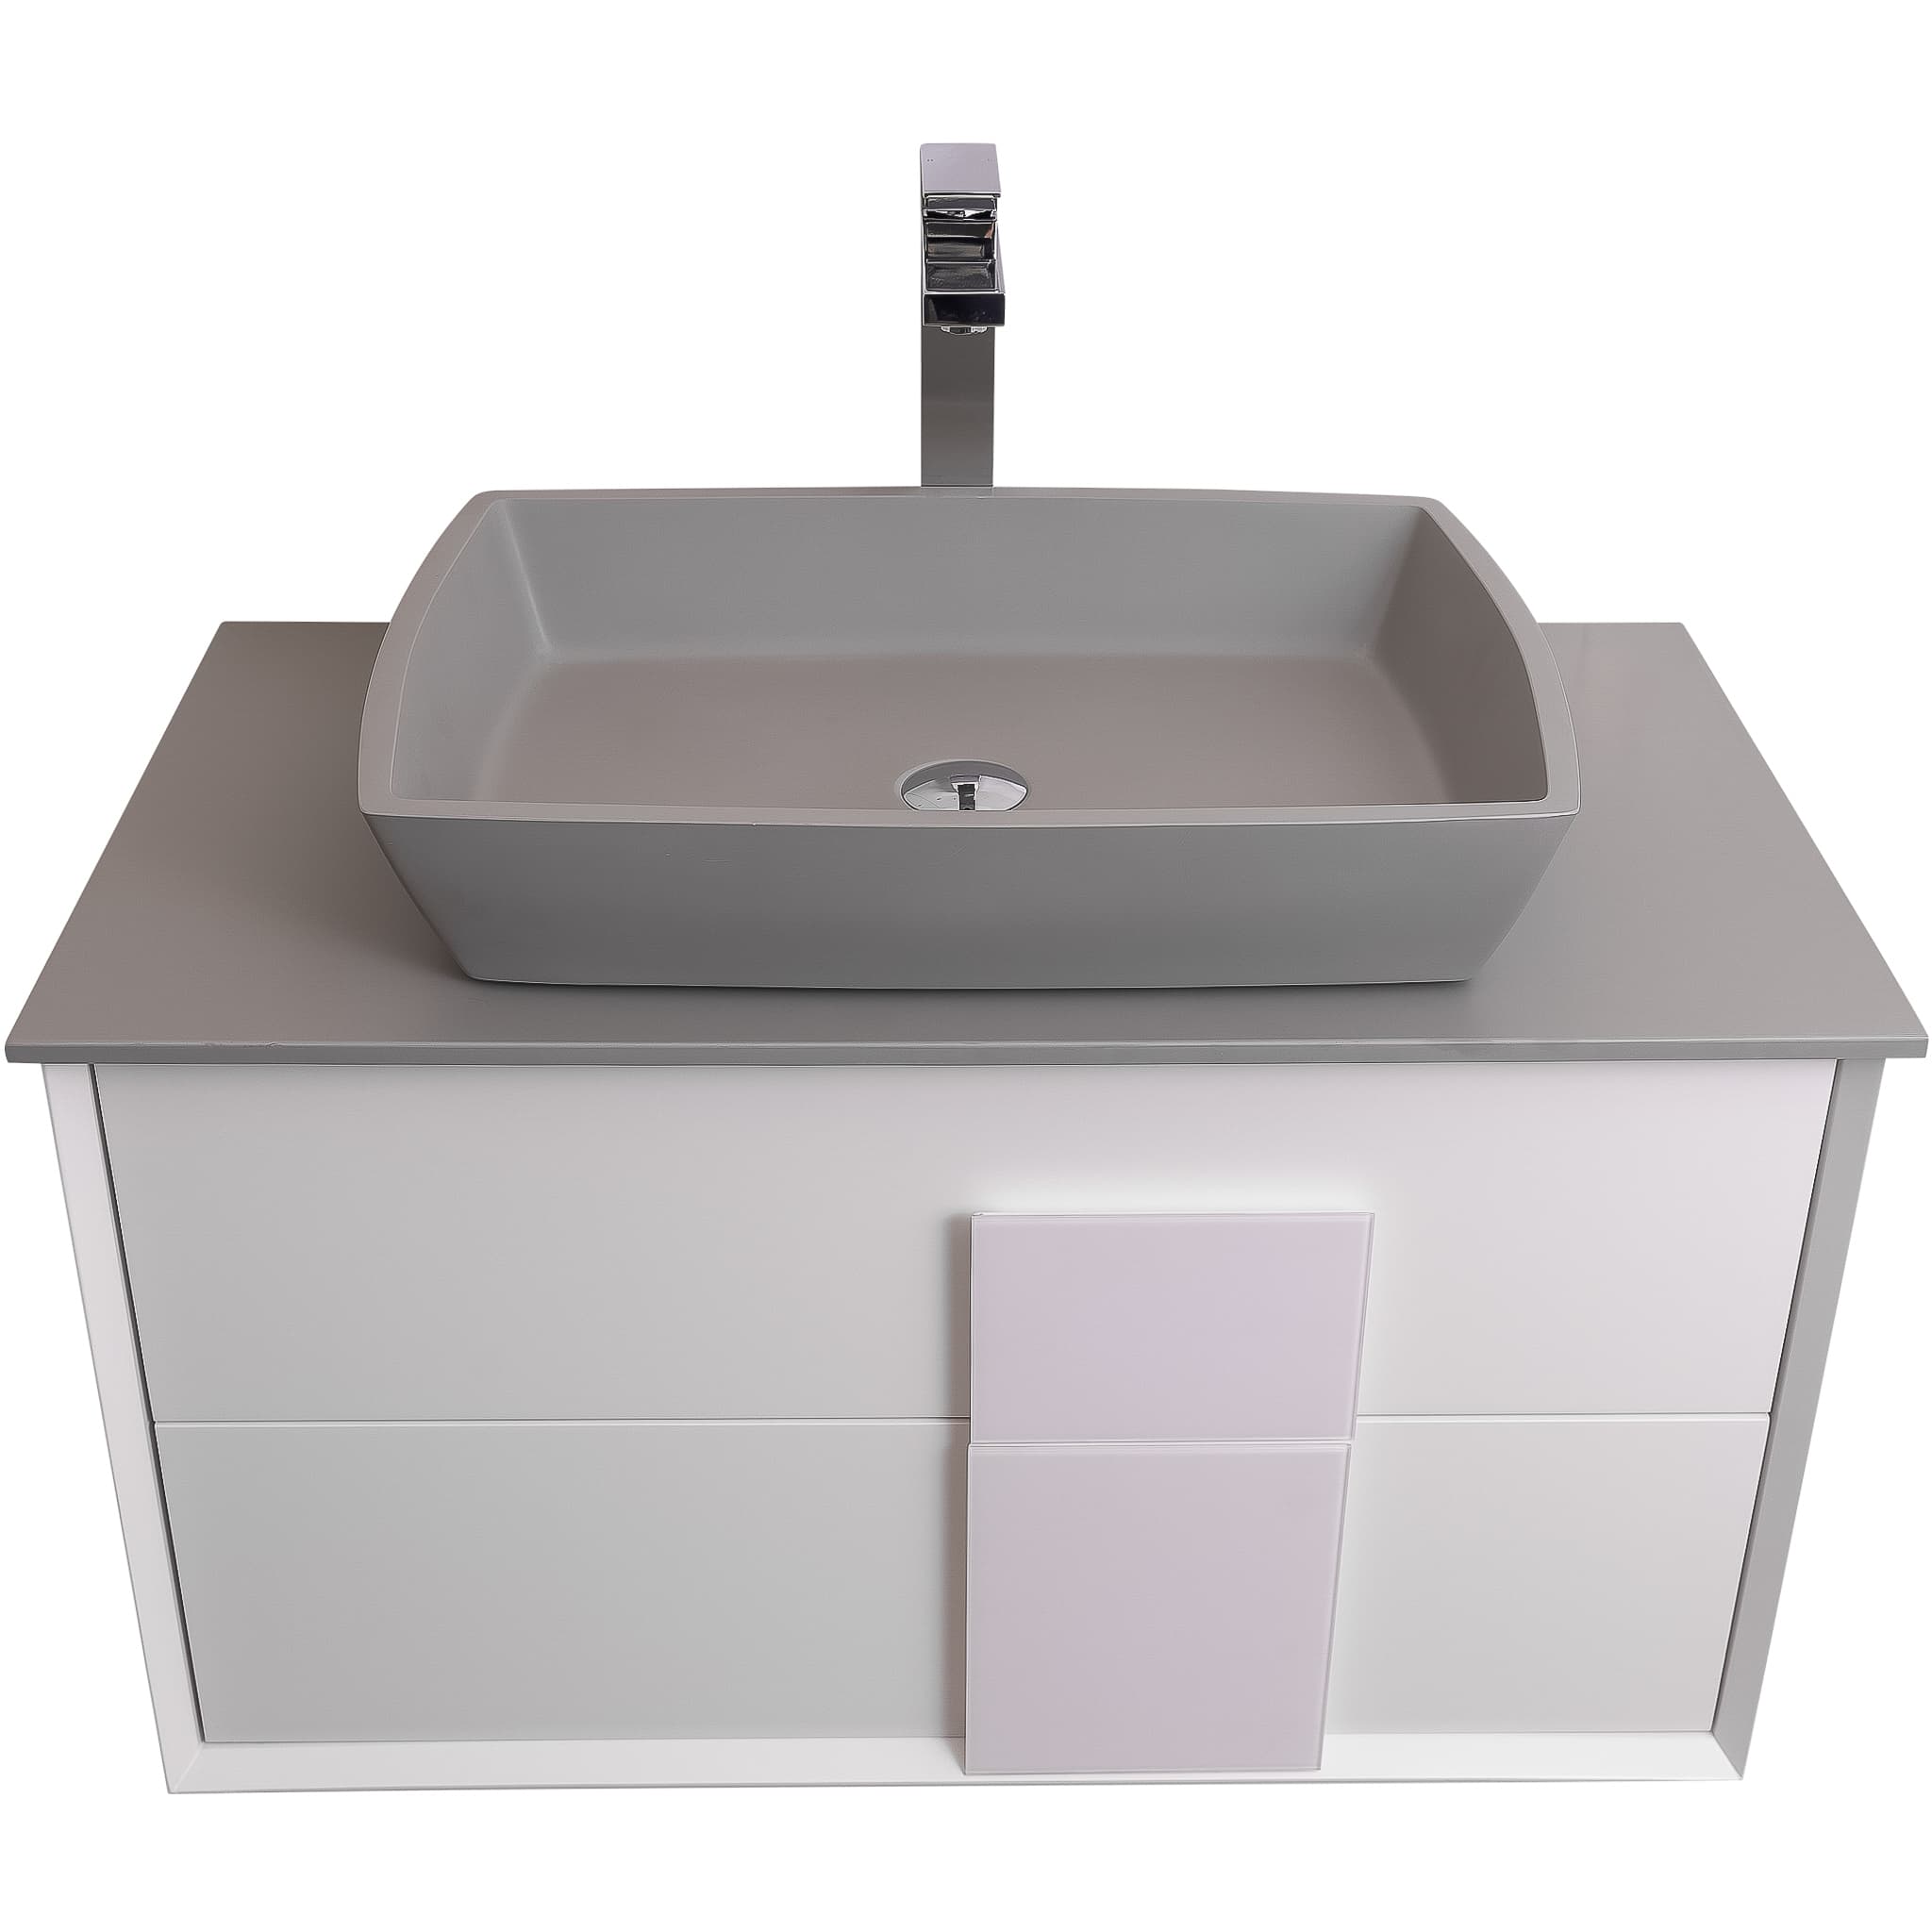 Piazza 31.5 Matte White With White Handle Cabinet, Solid Surface Flat Grey Counter and Square Solid Surface Grey Basin 1316, Wall Mounted Modern Vanity Set